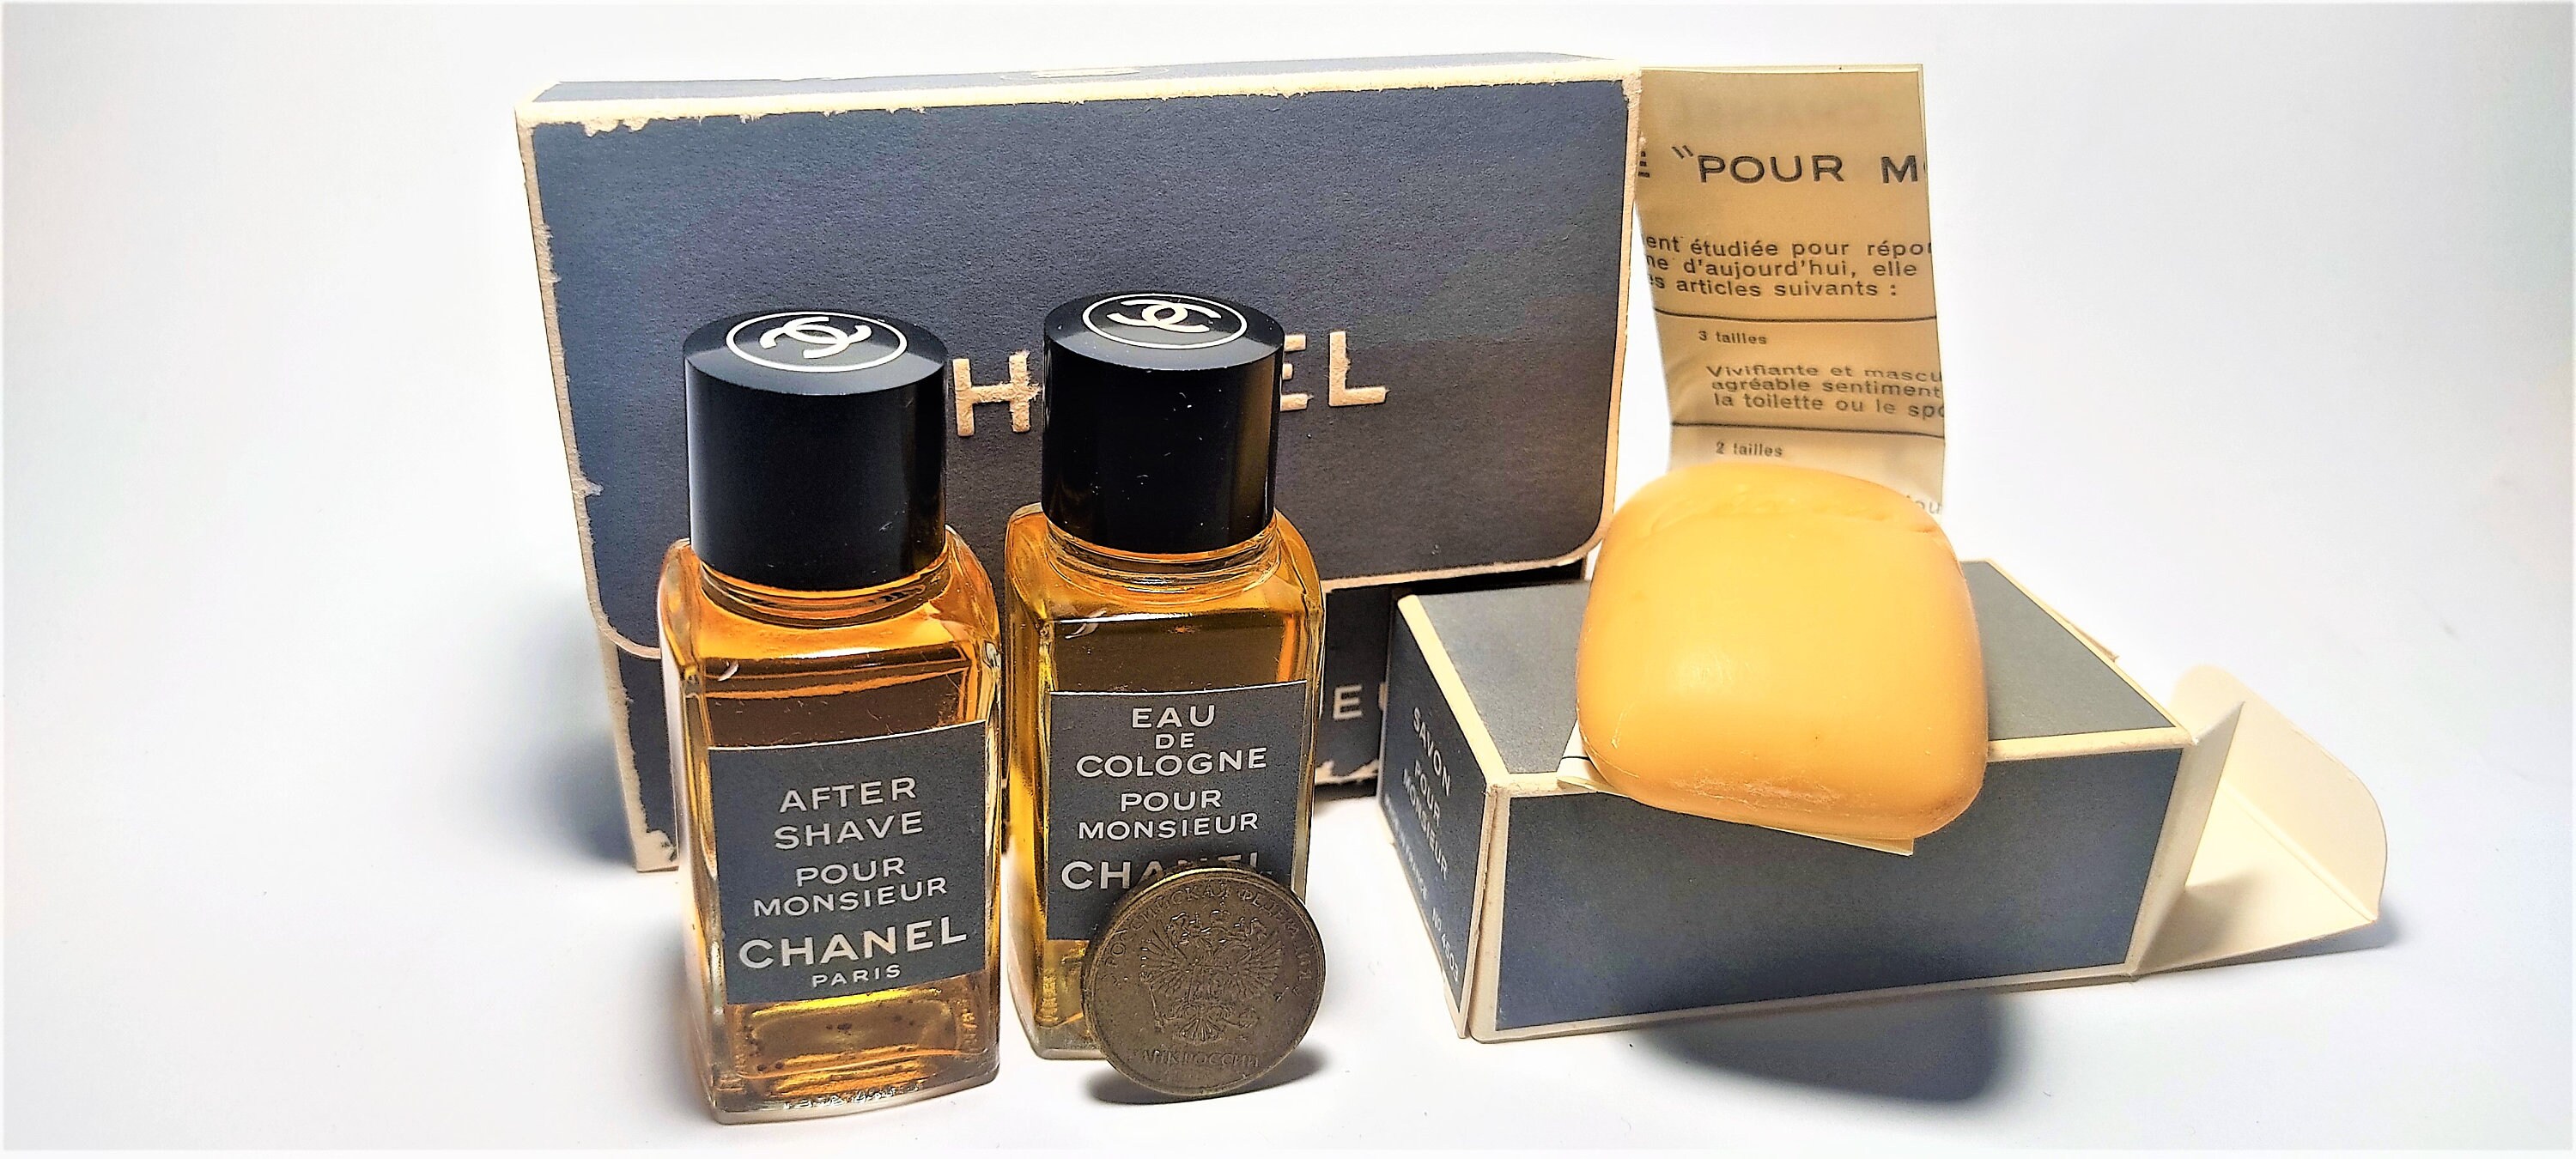 Buy Chanel After Shave Online In India -  India